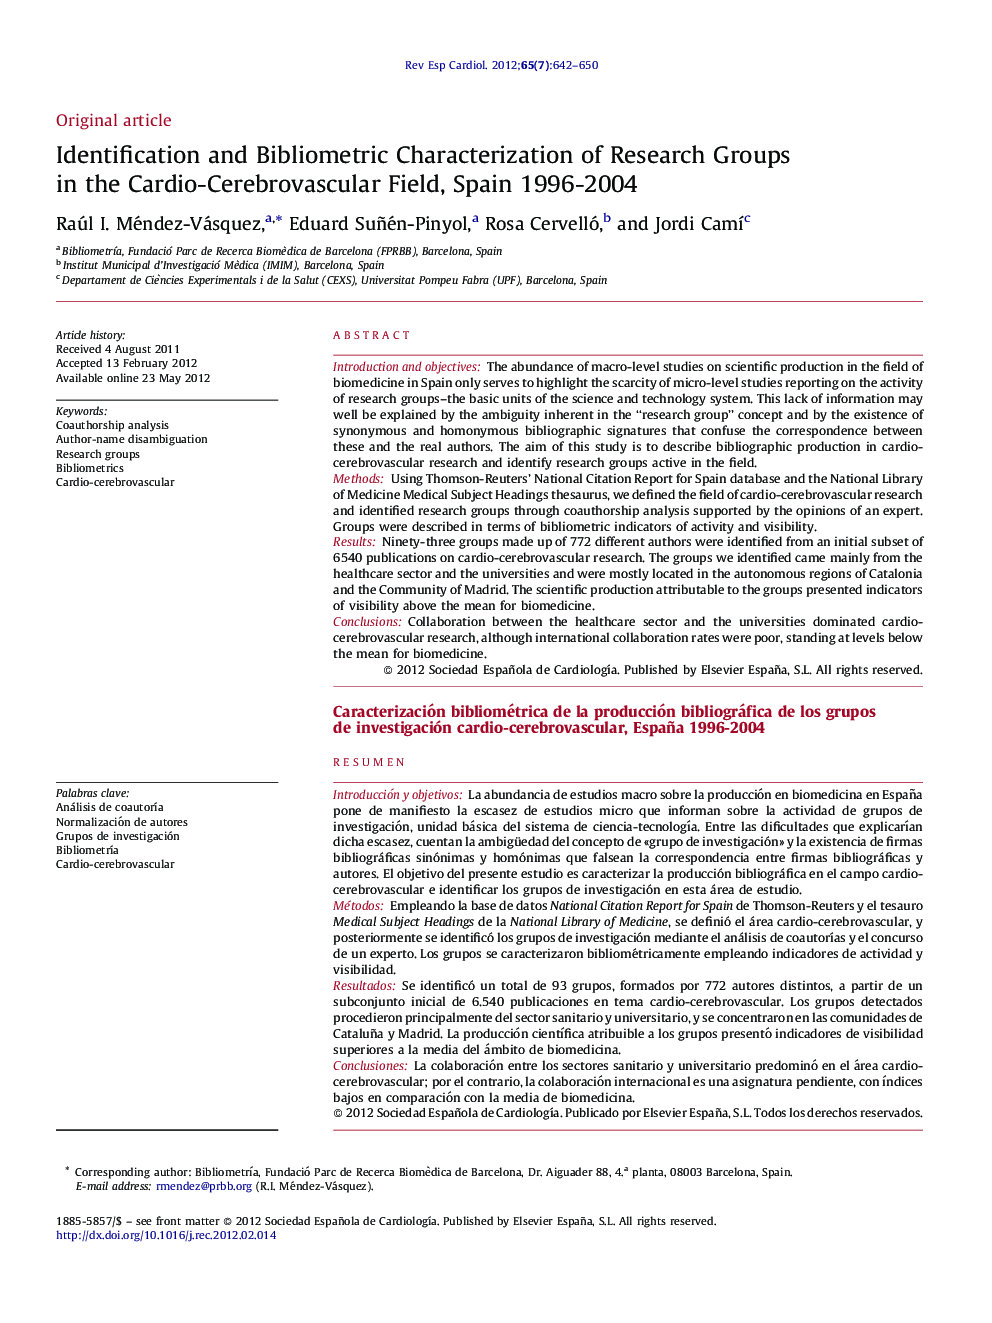 Identification and Bibliometric Characterization of Research Groups in the Cardio-Cerebrovascular Field, Spain 1996-2004